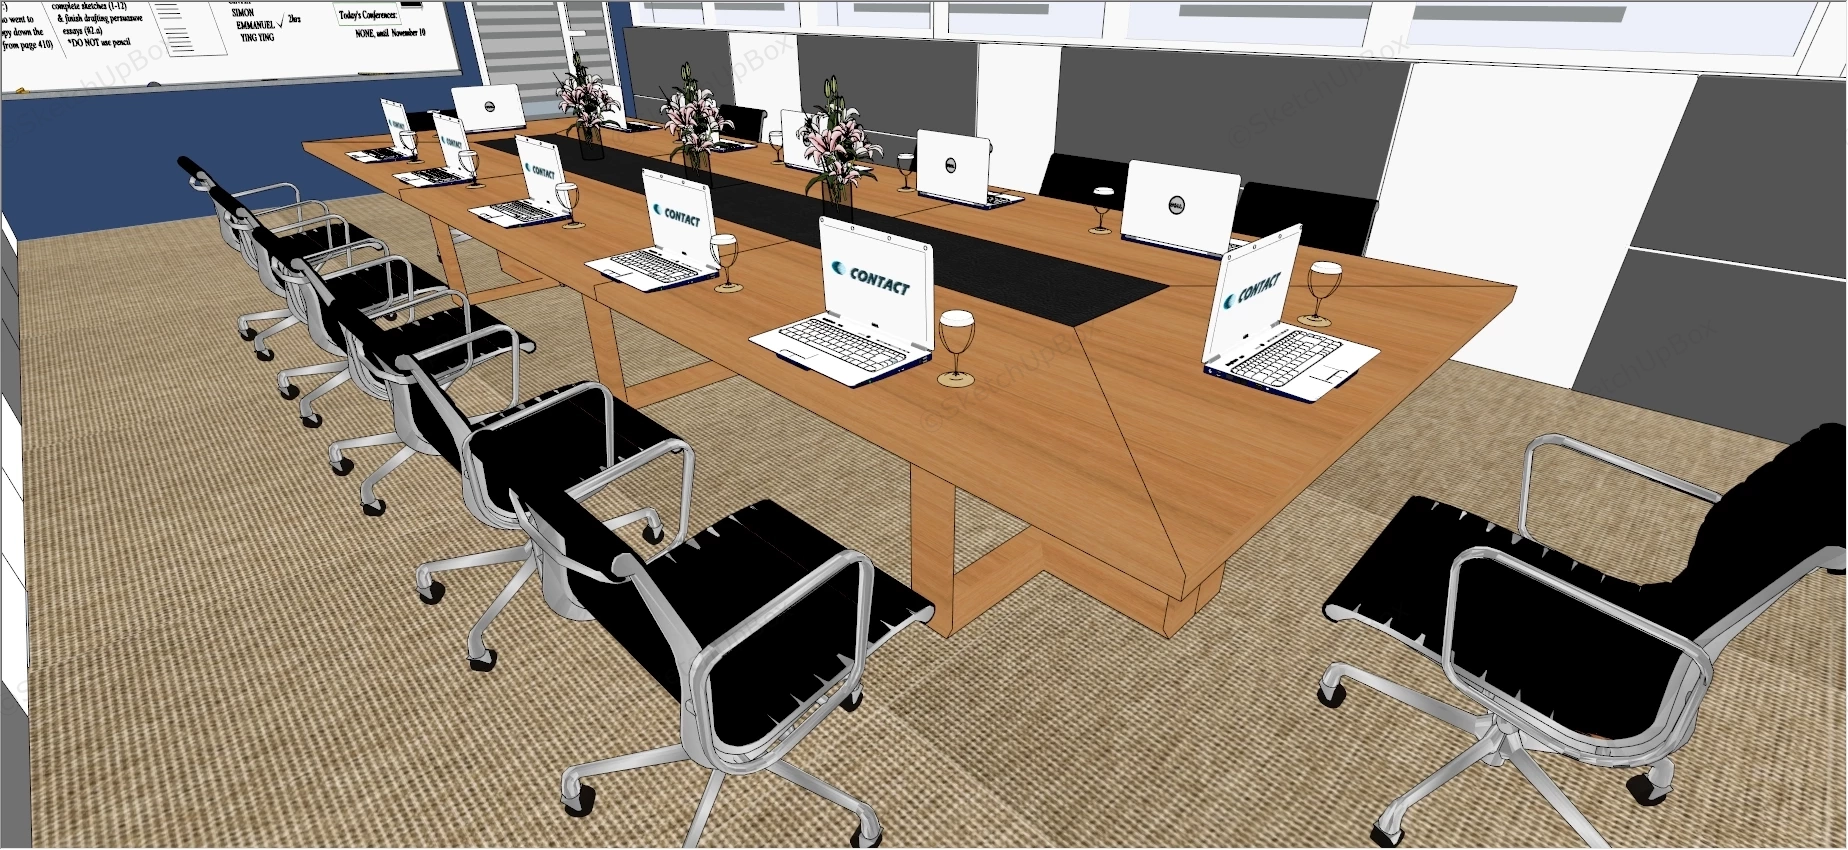 IT Department Conference Room Design sketchup model preview - SketchupBox